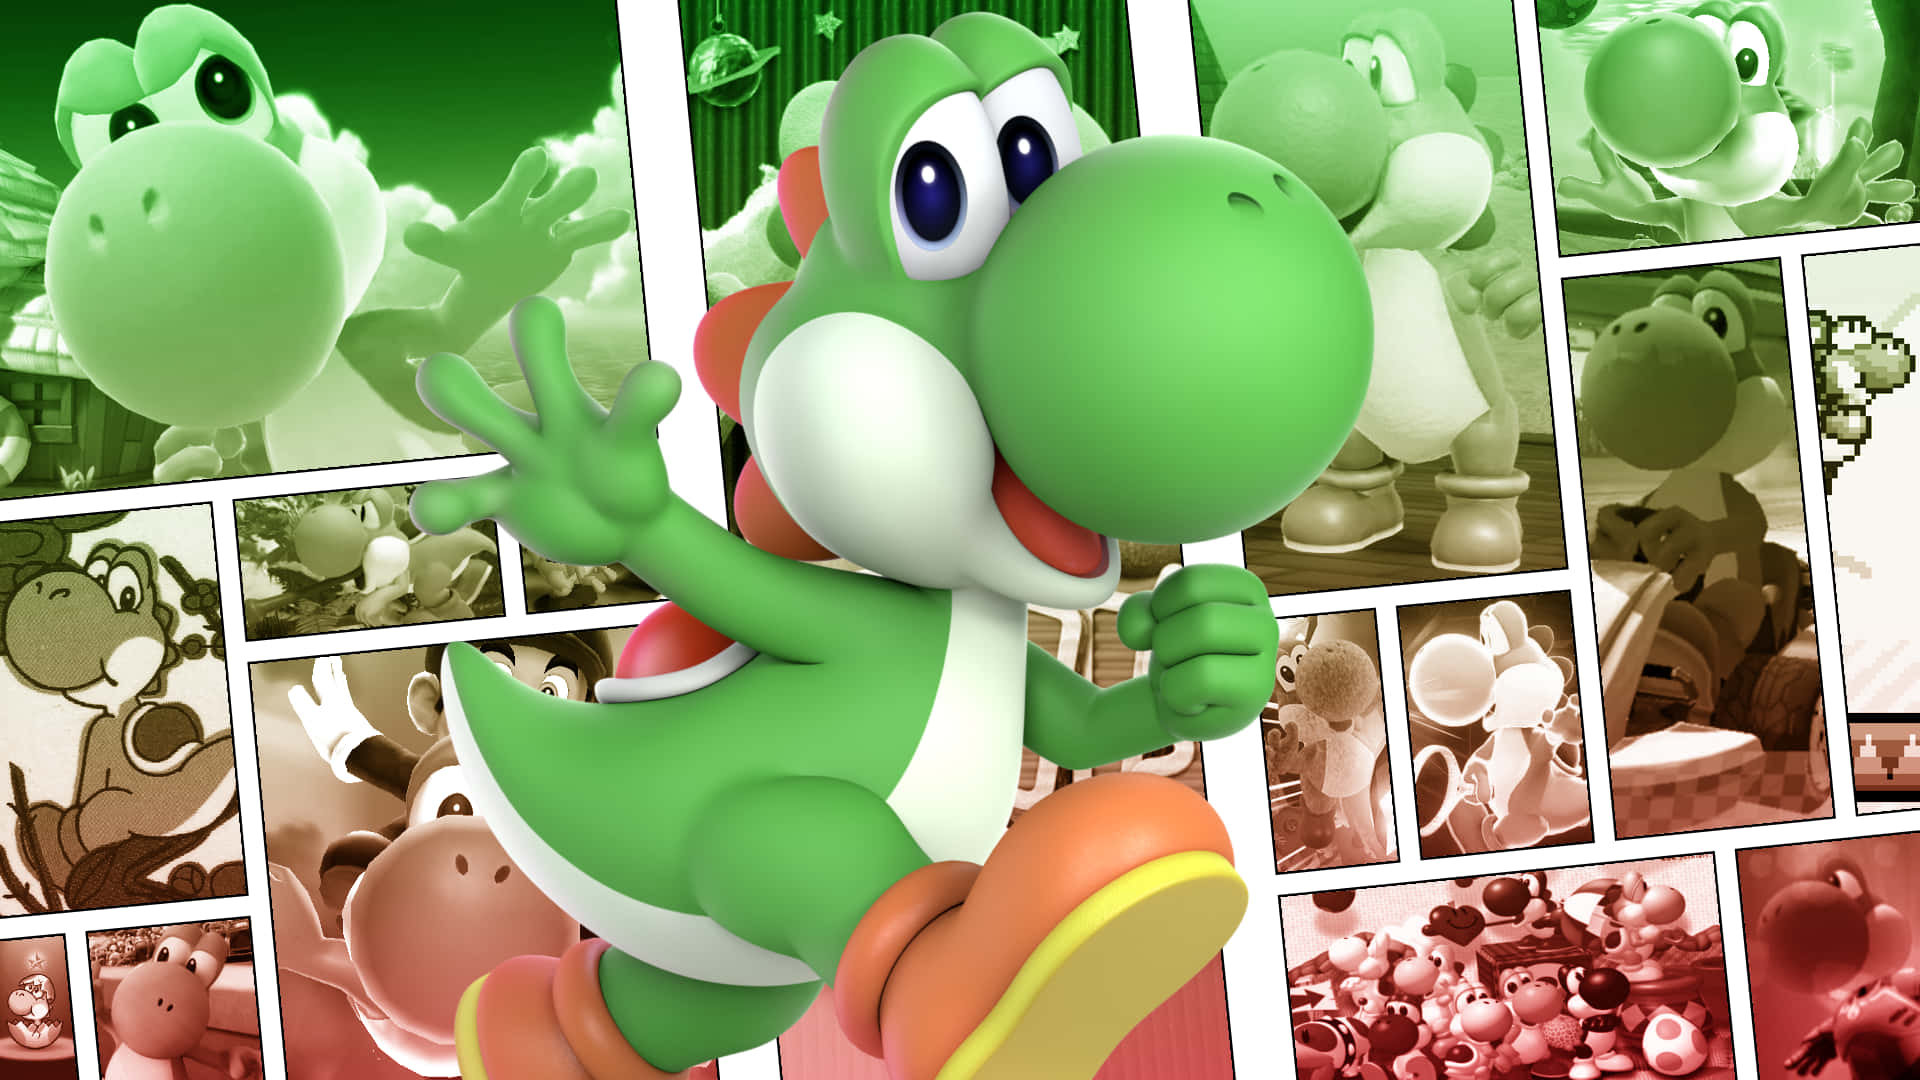 Explore The World With Yoshi